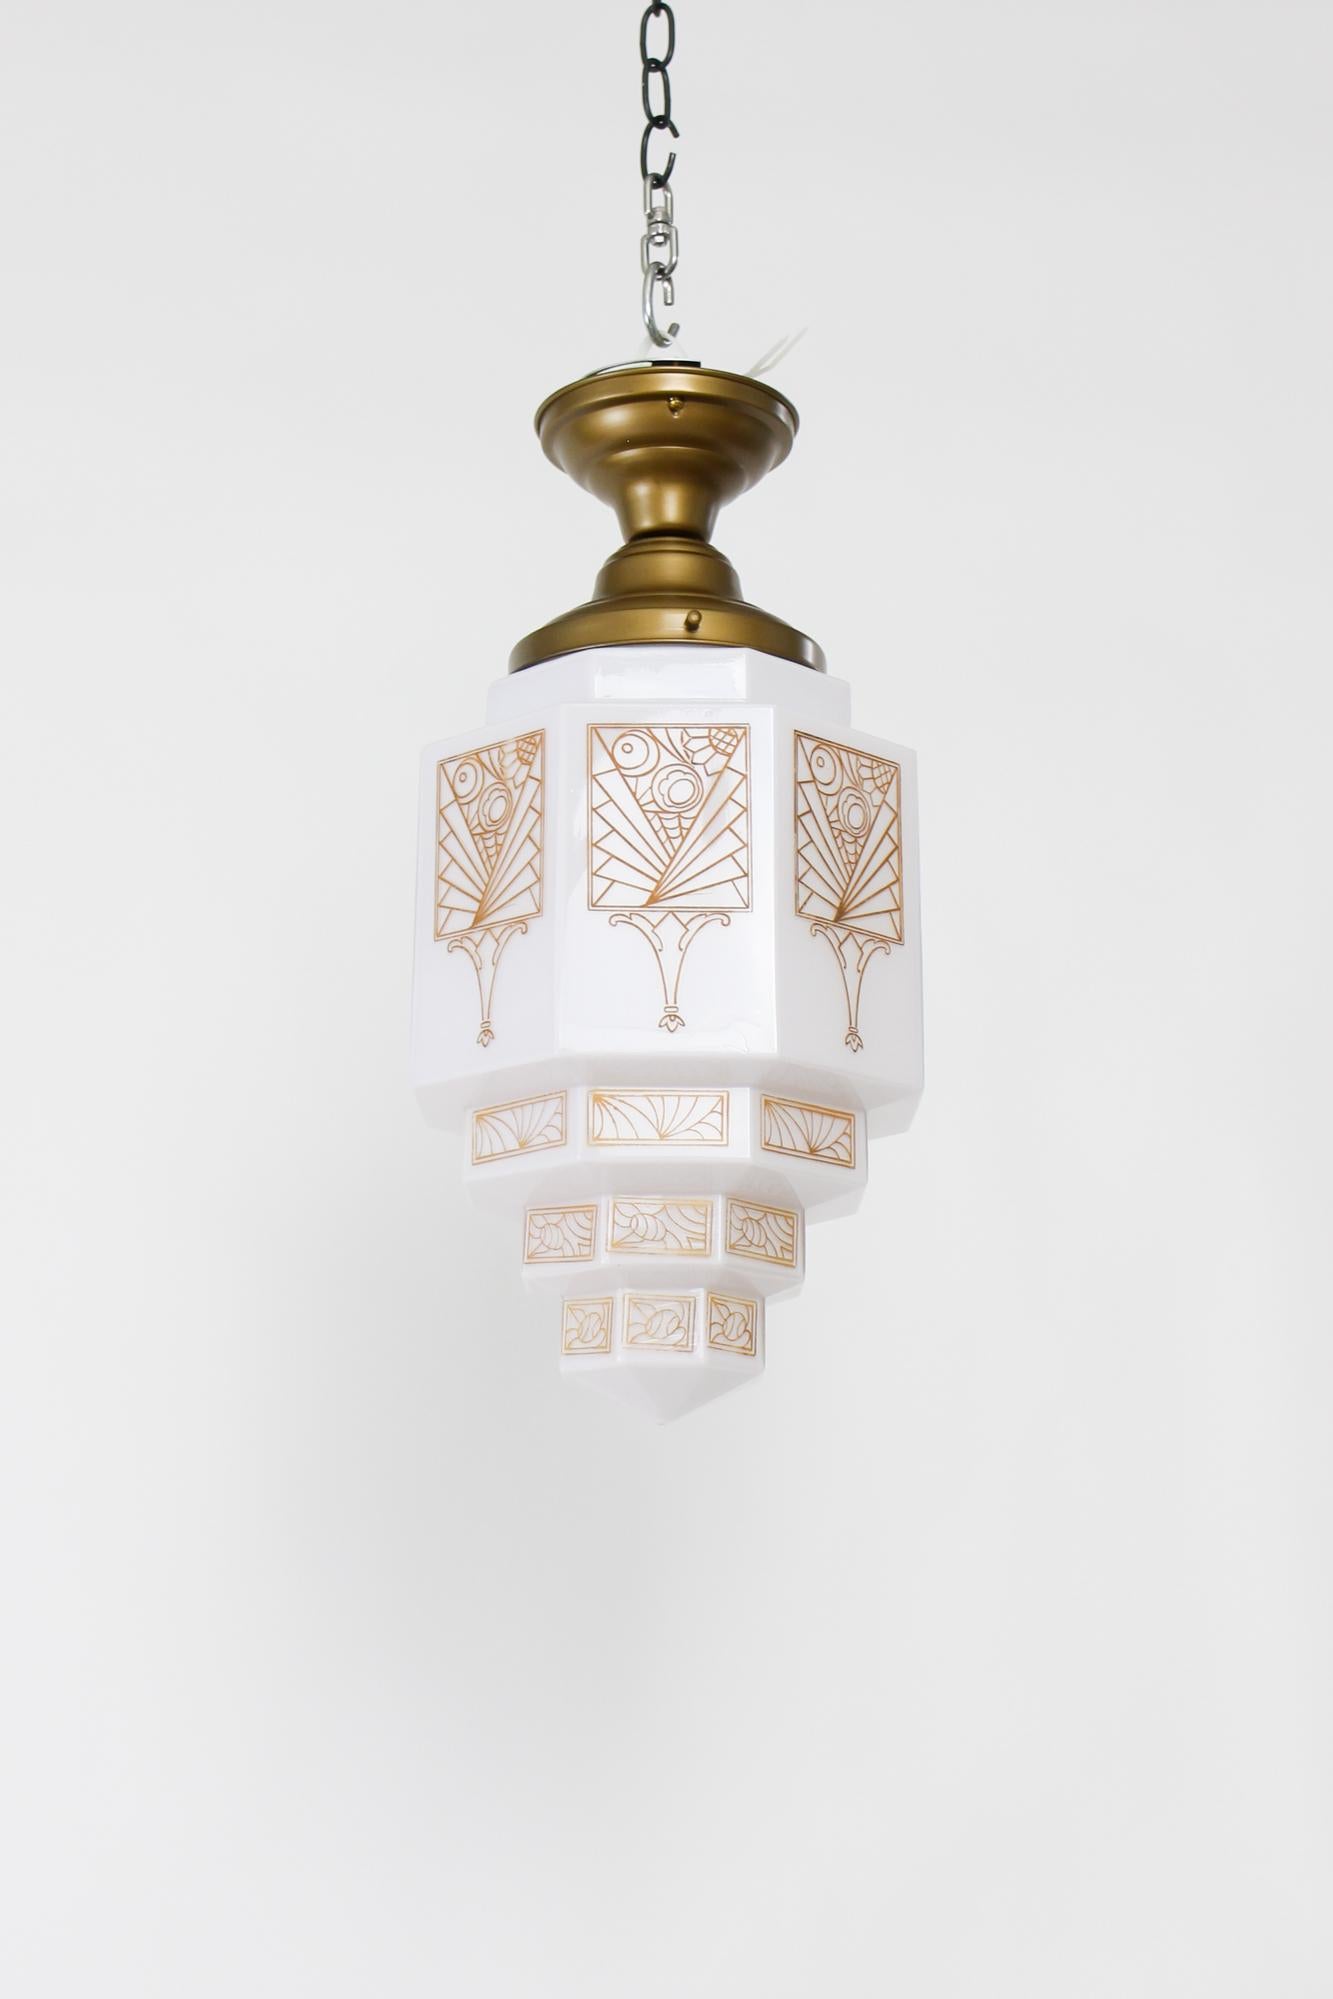 Flush mount fixture in an Antique brass finish. Milk glass in a geometric skyscraper shape with an art deco patterned transfer design in amber. Single Edison base bulb, 100 W max. US 120V. Hardwired. Fixture is new, glass in very good condition for